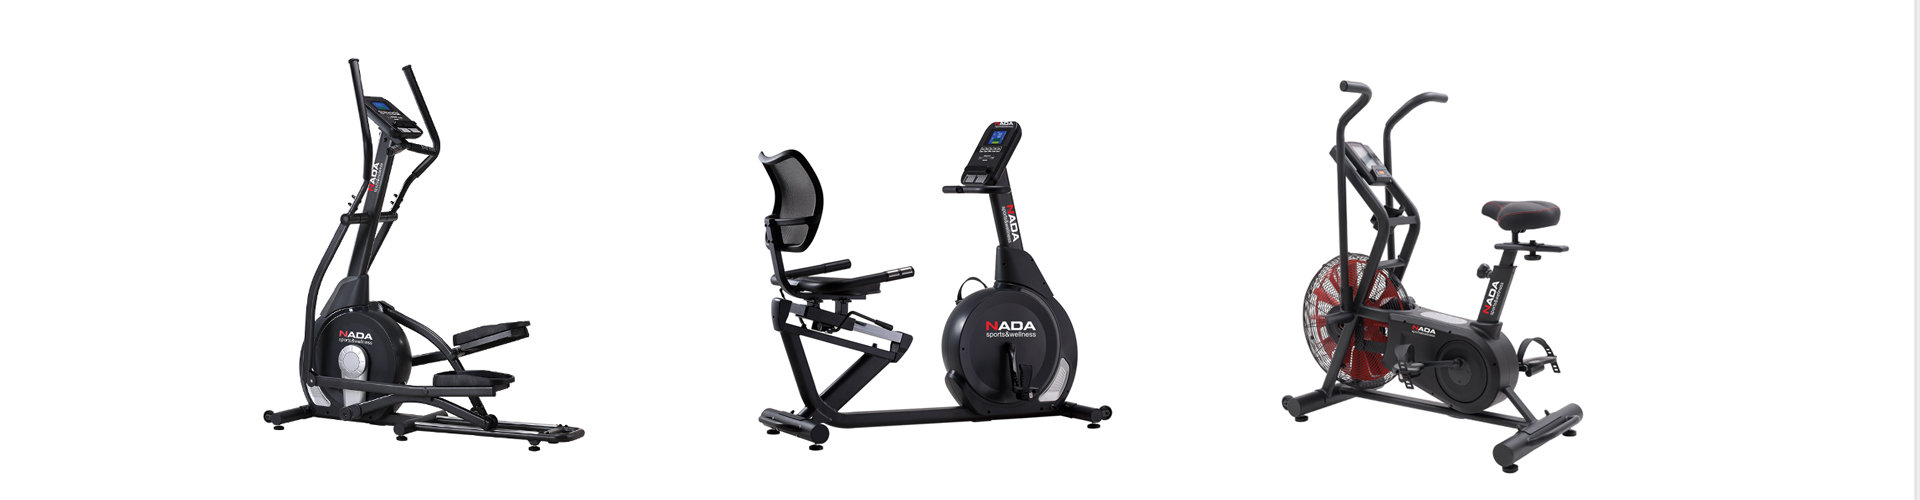 http://www.nadasports.com/product/en/Product-Stationary-bikes-fitness-1.html